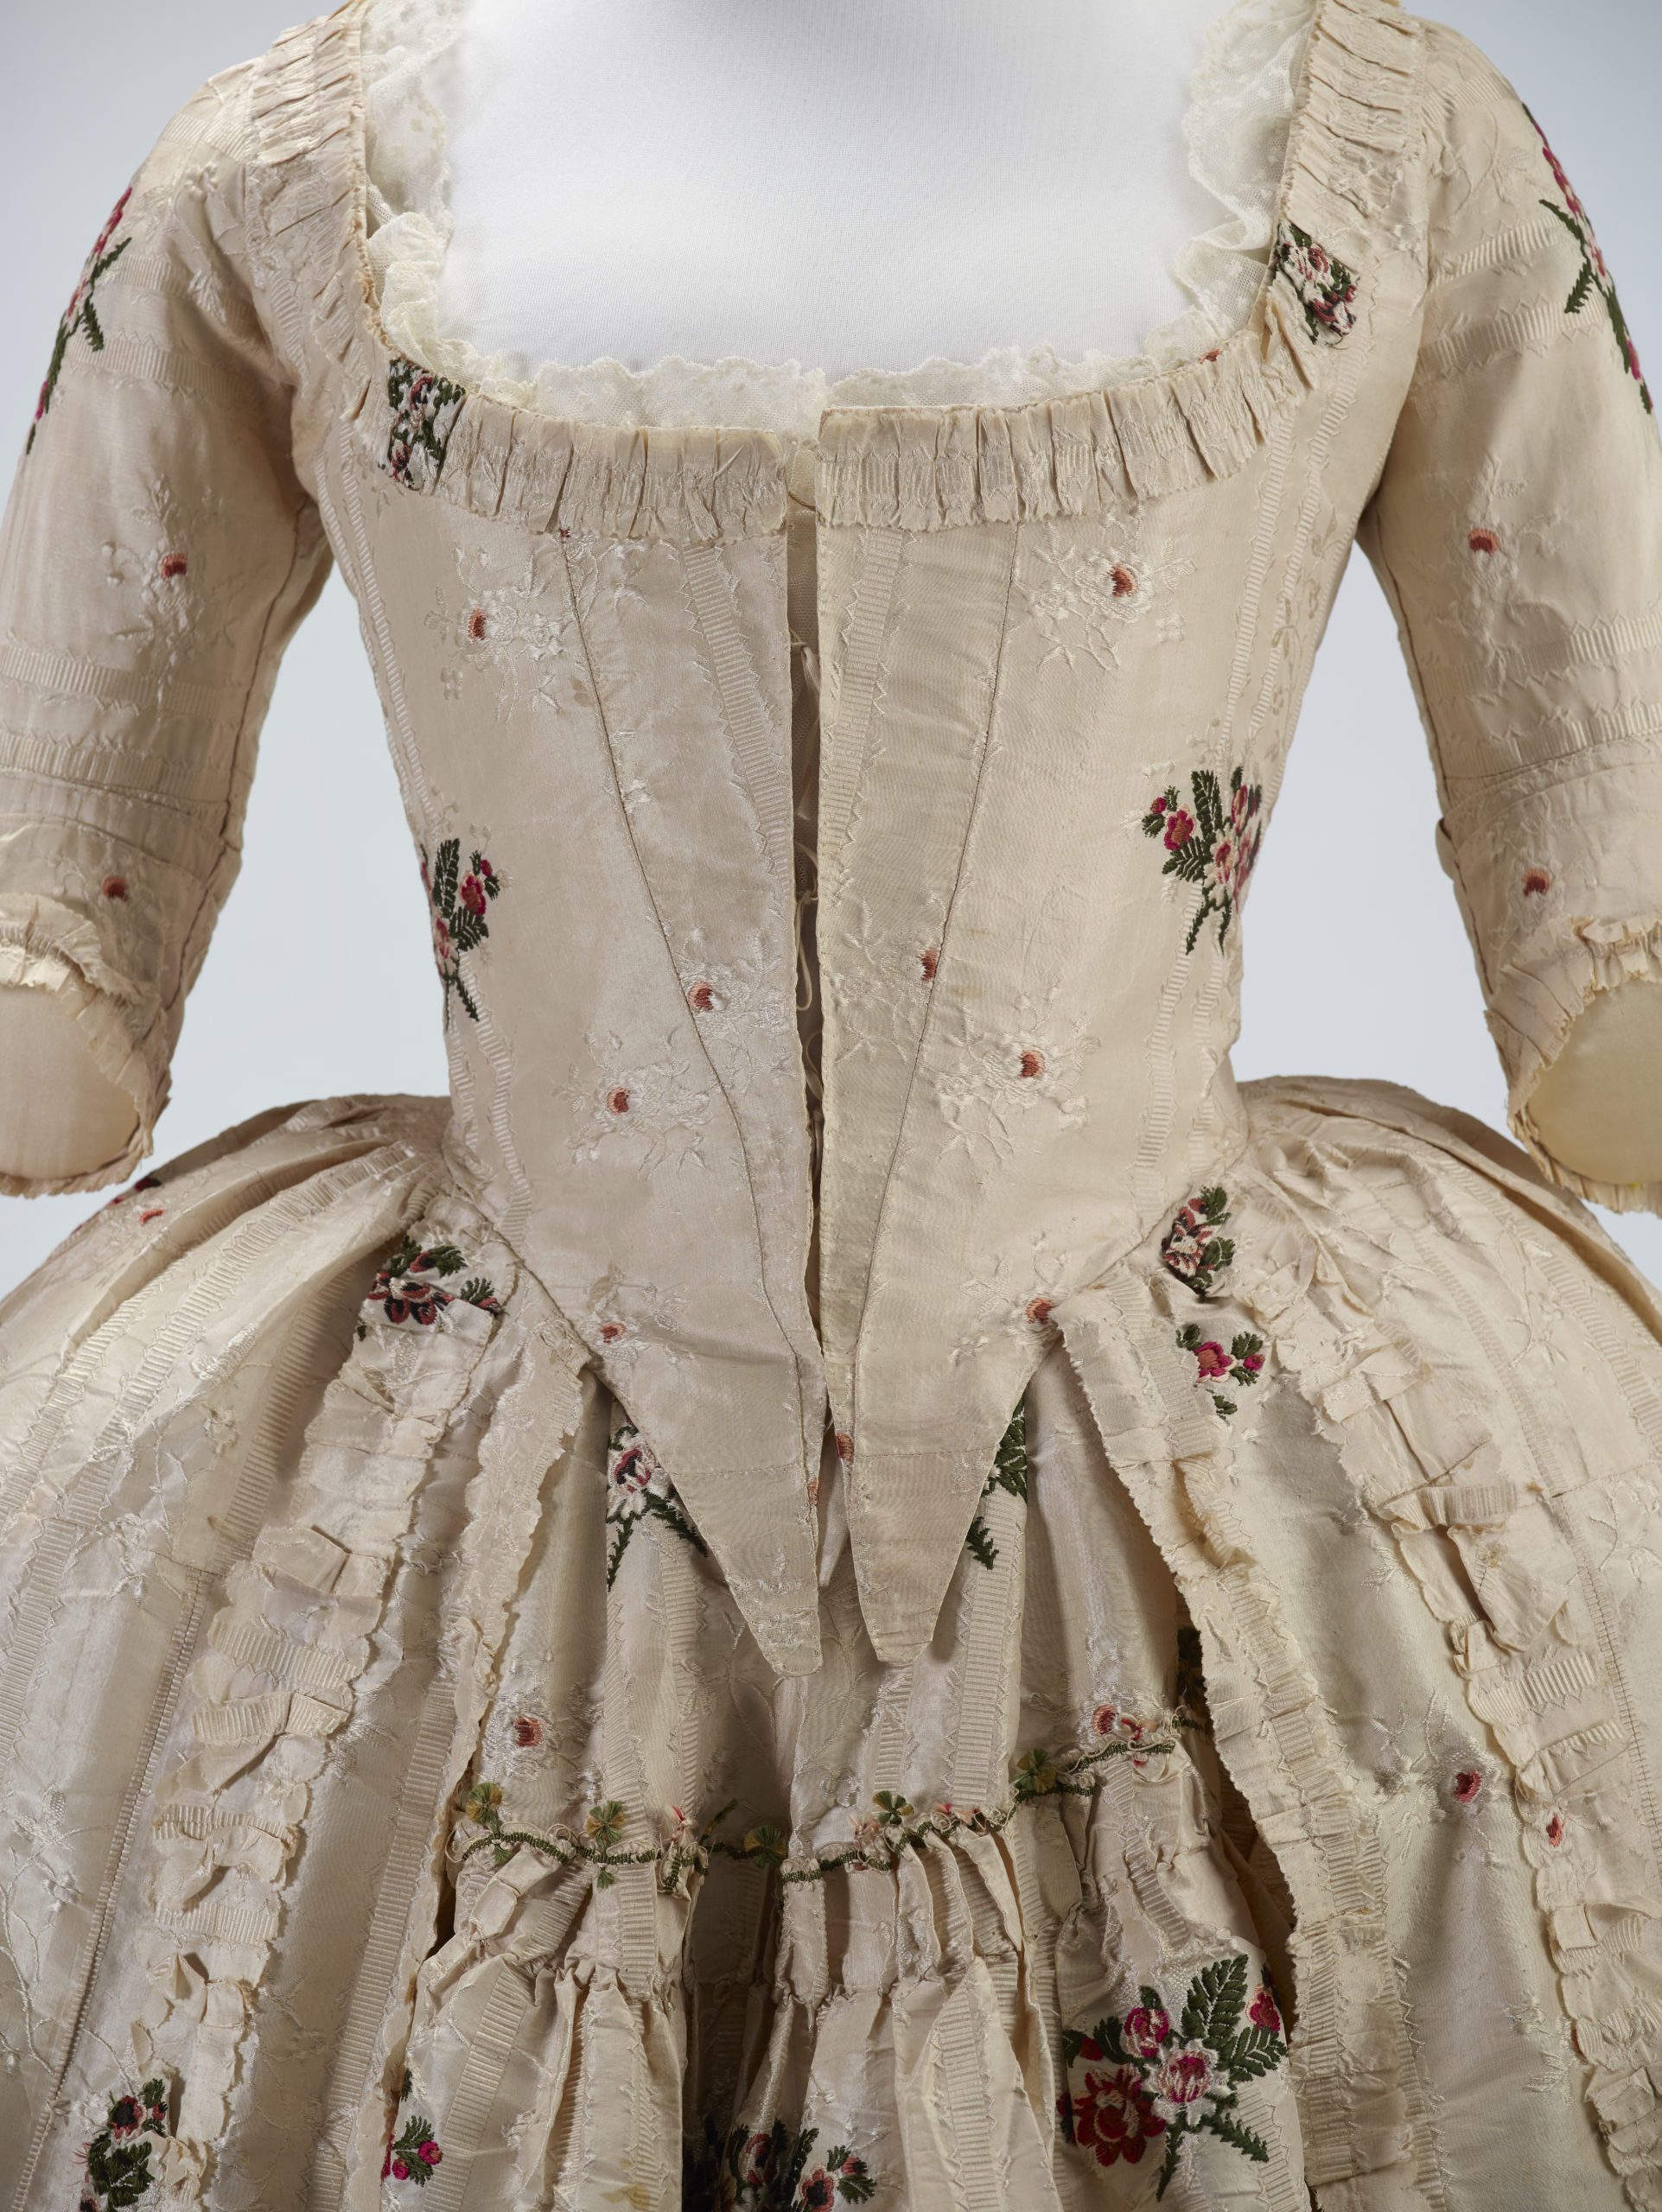 Robe à l'Anglaise (actually an Italian Gown with a seperate back bodice), 1775-1785, England, maker unknown. Gift of Mrs B Vye, 1951. CC BY-NC-ND 4.0. Te Papa (PC000072)